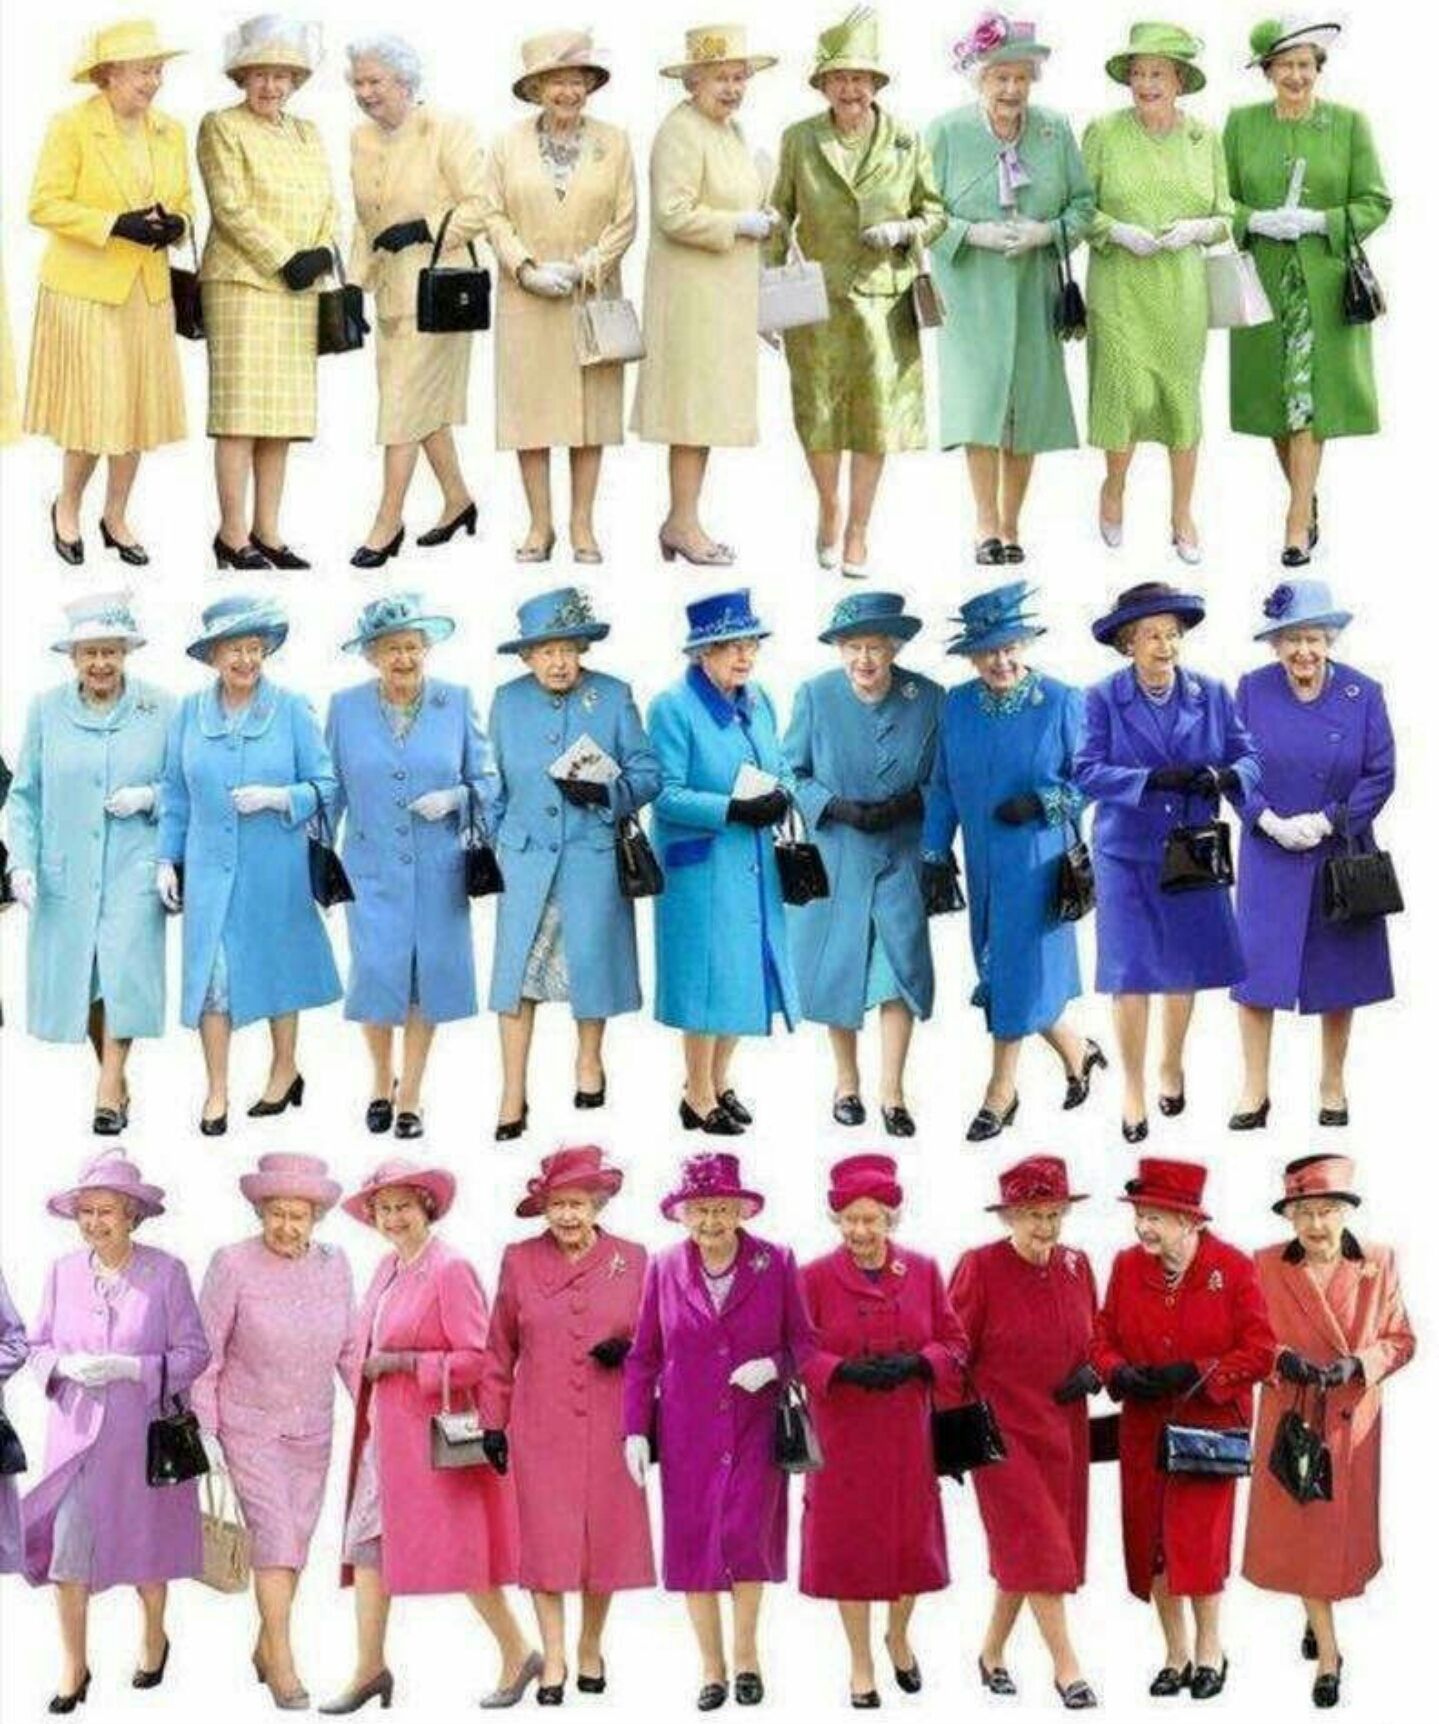 Are you even the Queen if you don't come in every colour.